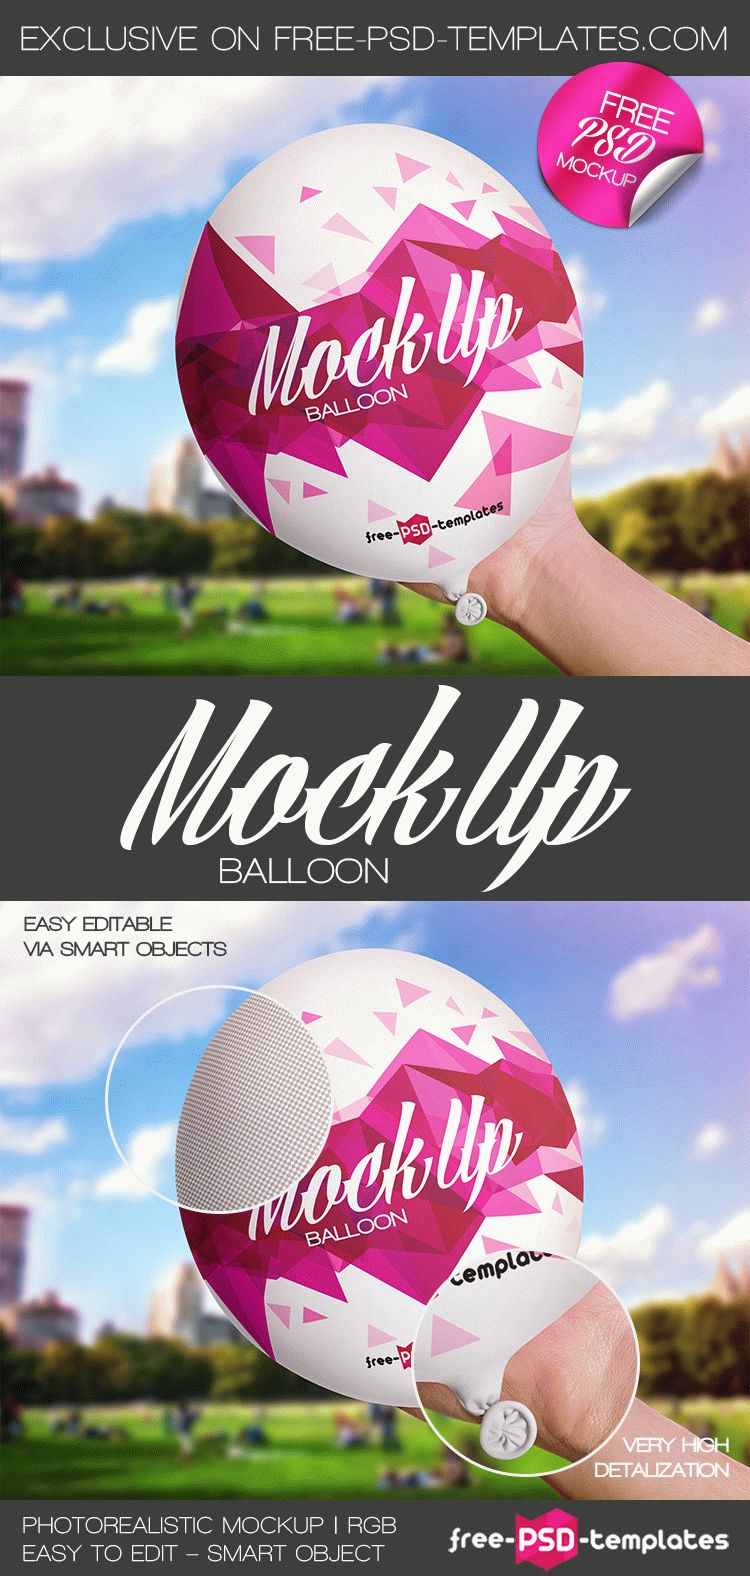 Download Free Balloon Mock-up in PSD | Free PSD Templates